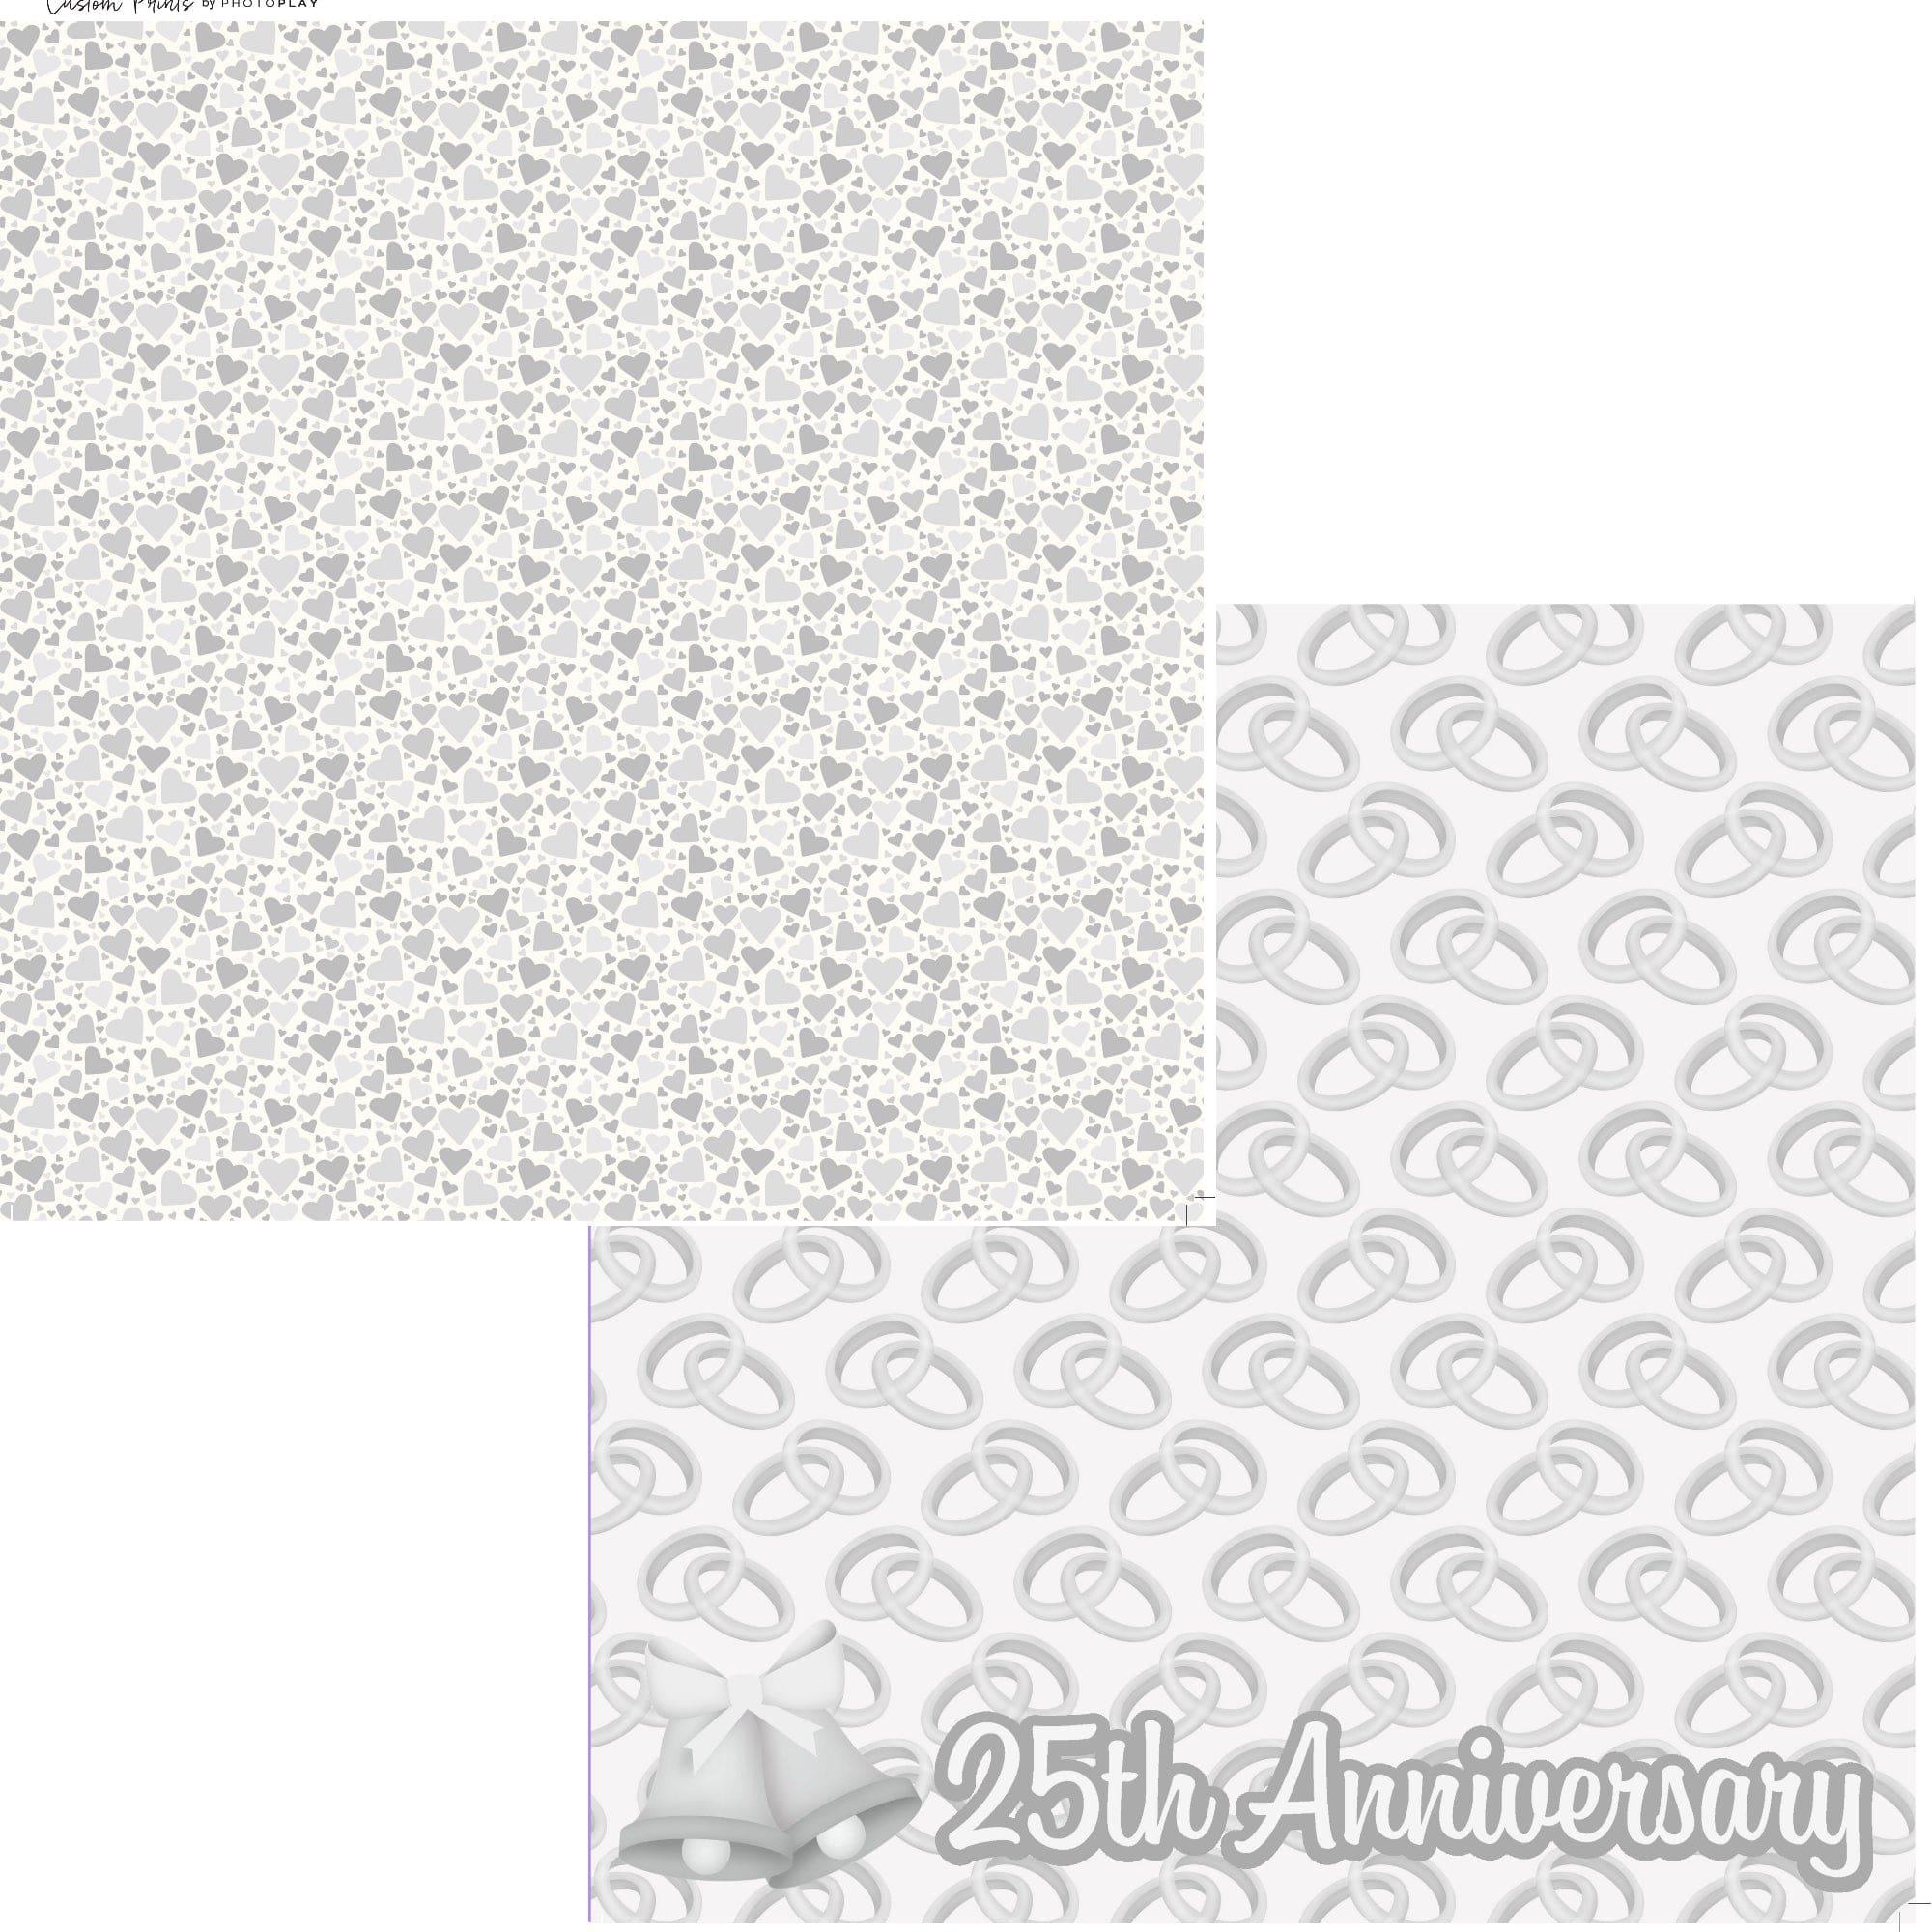 Lasting Love Collection 25th Anniversary 12 x 12 Double-Sided Scrapbook Paper by SSC Designs - Scrapbook Supply Companies